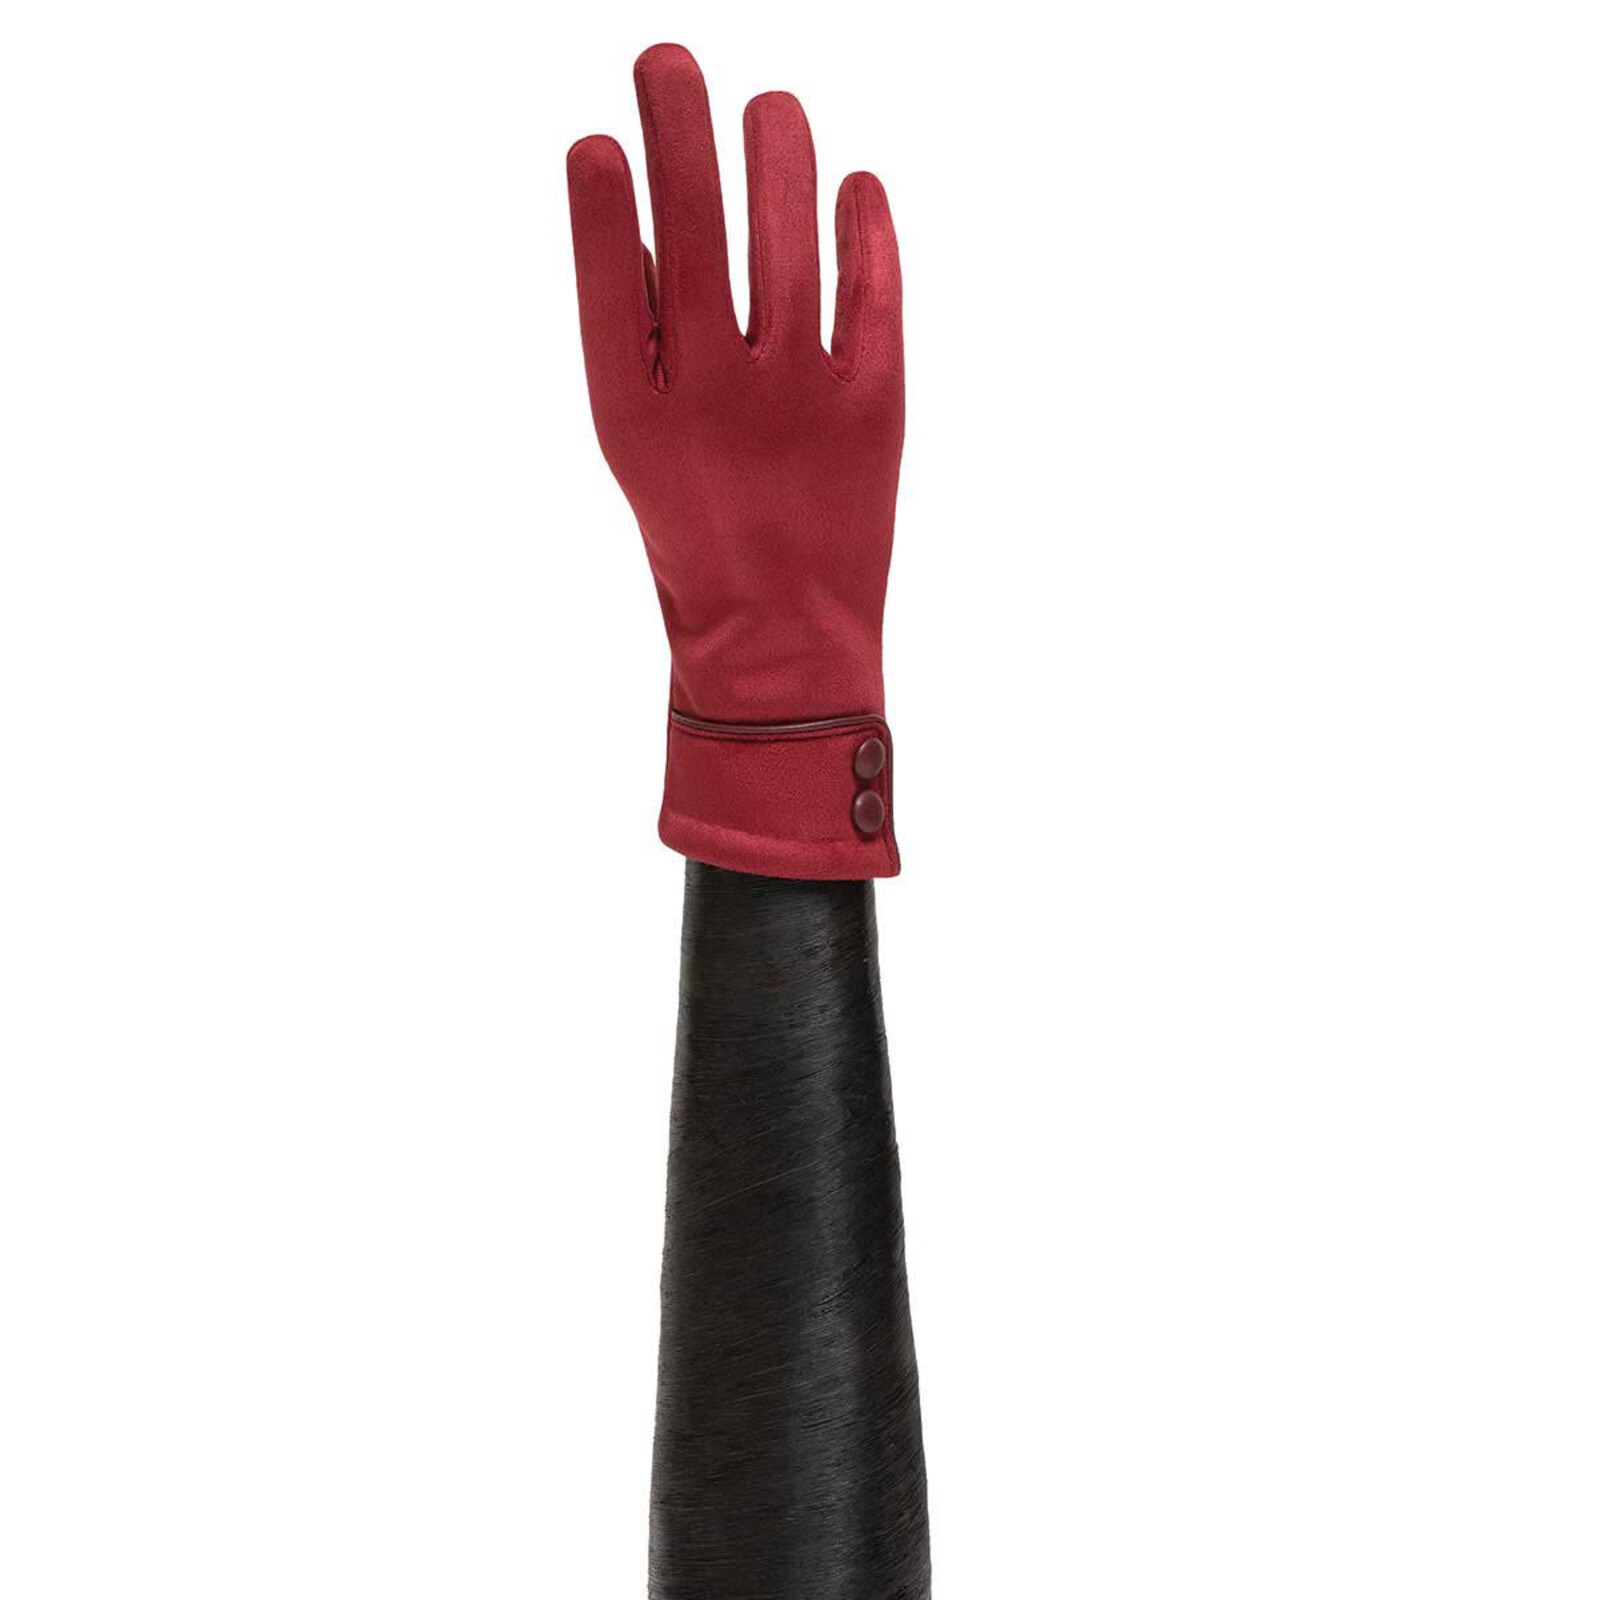 Trezo RED GLOVES WITH 2 BUTTON CUFF   X8080 loading=